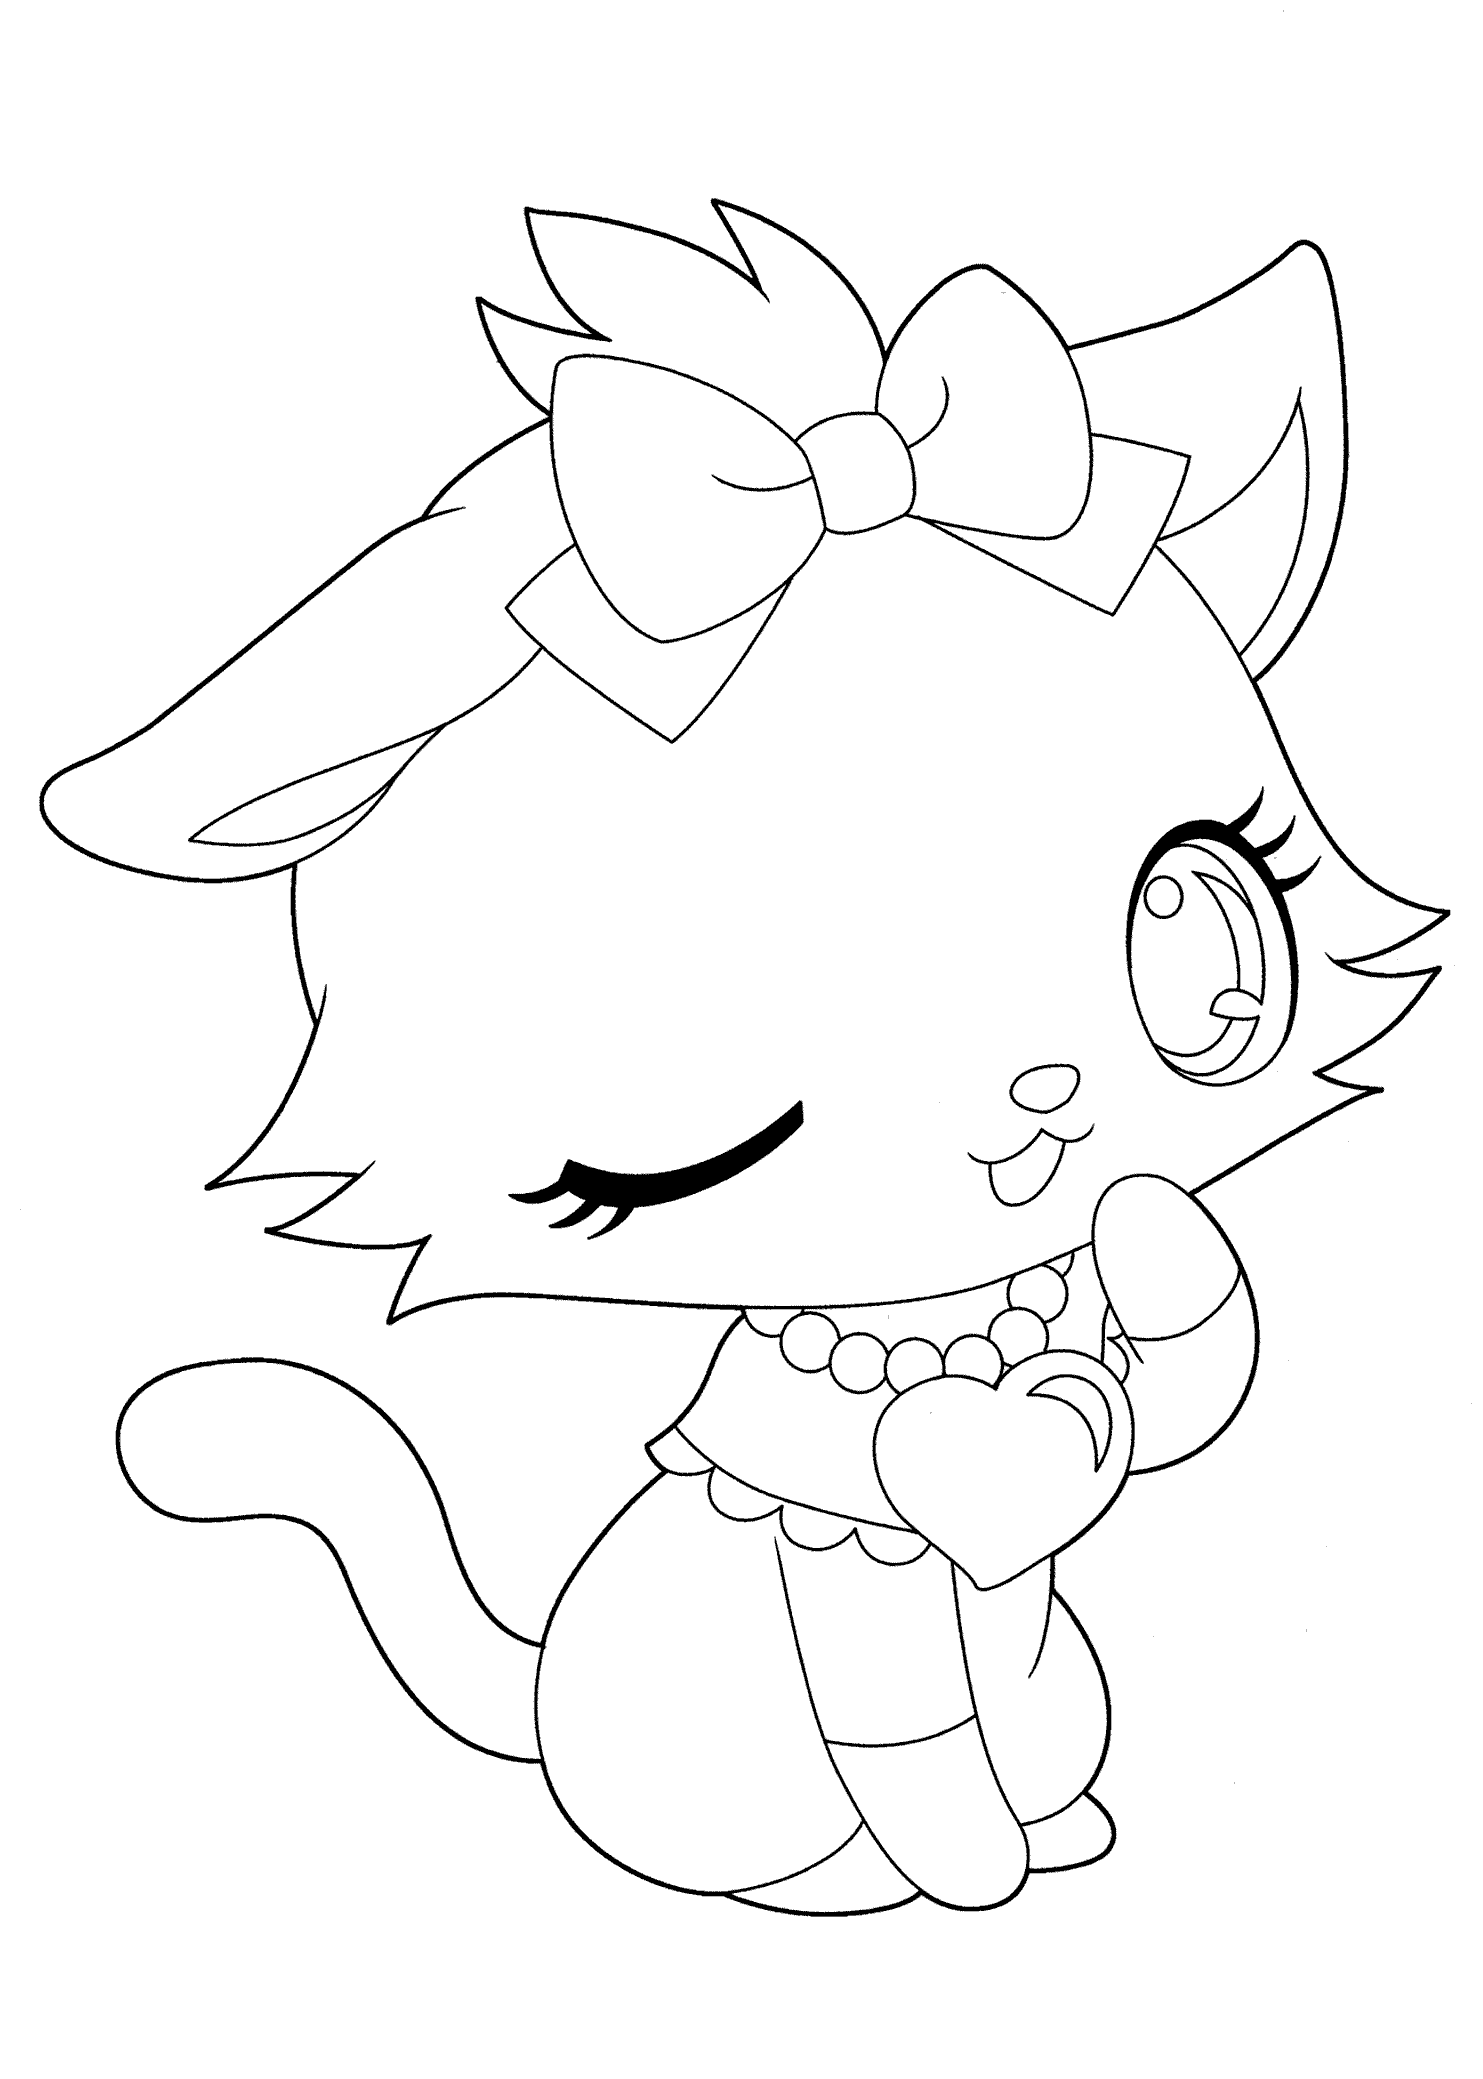 Anime Cat Girl Coloring Pages - Coloring Home